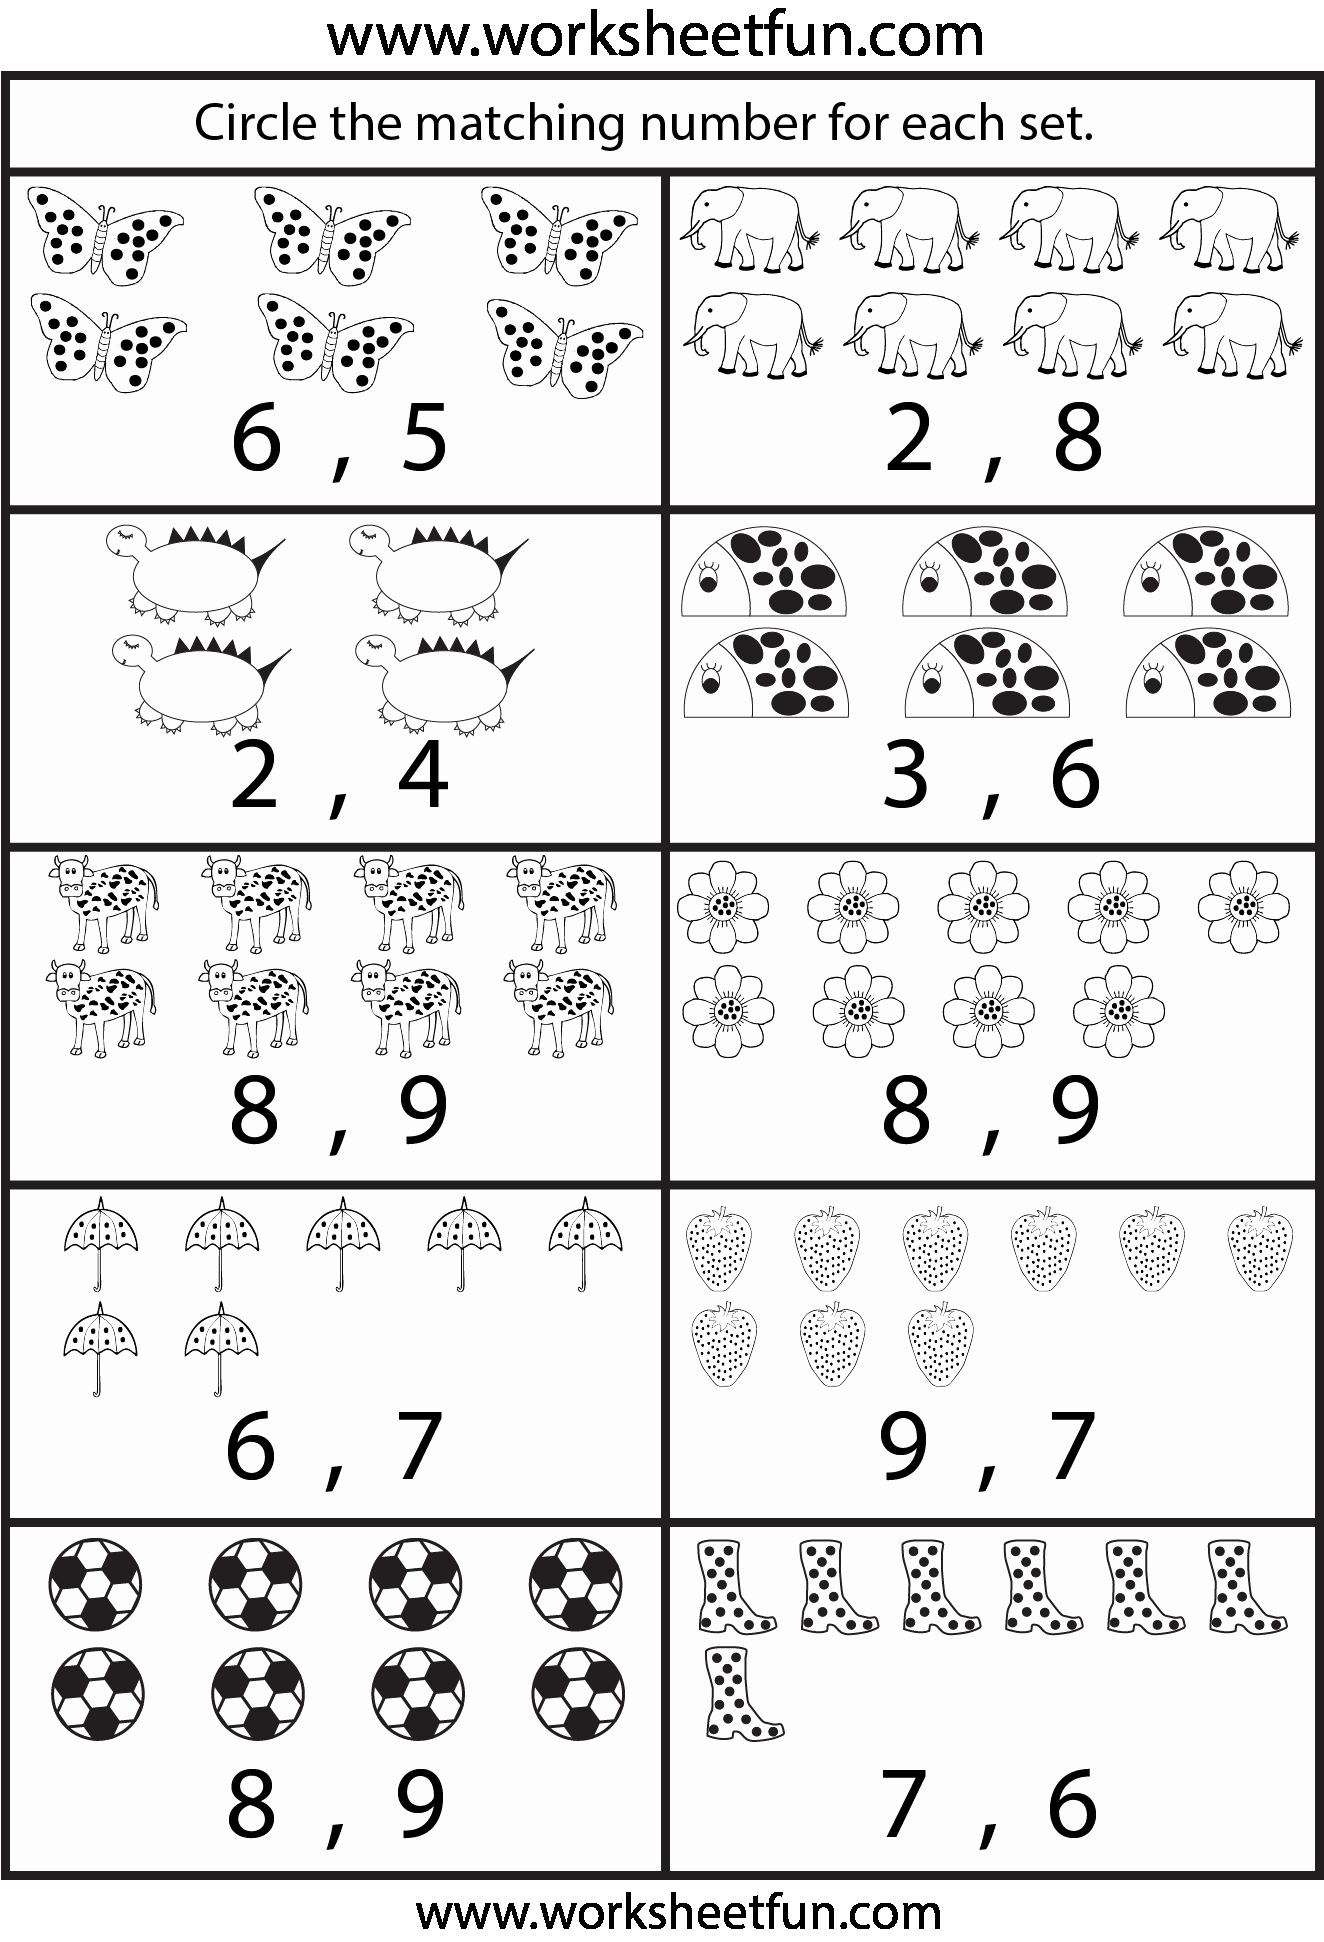 Counting to 20 Worksheet Beautiful Counting to 20 Worksheets Pdf Nepalfiles